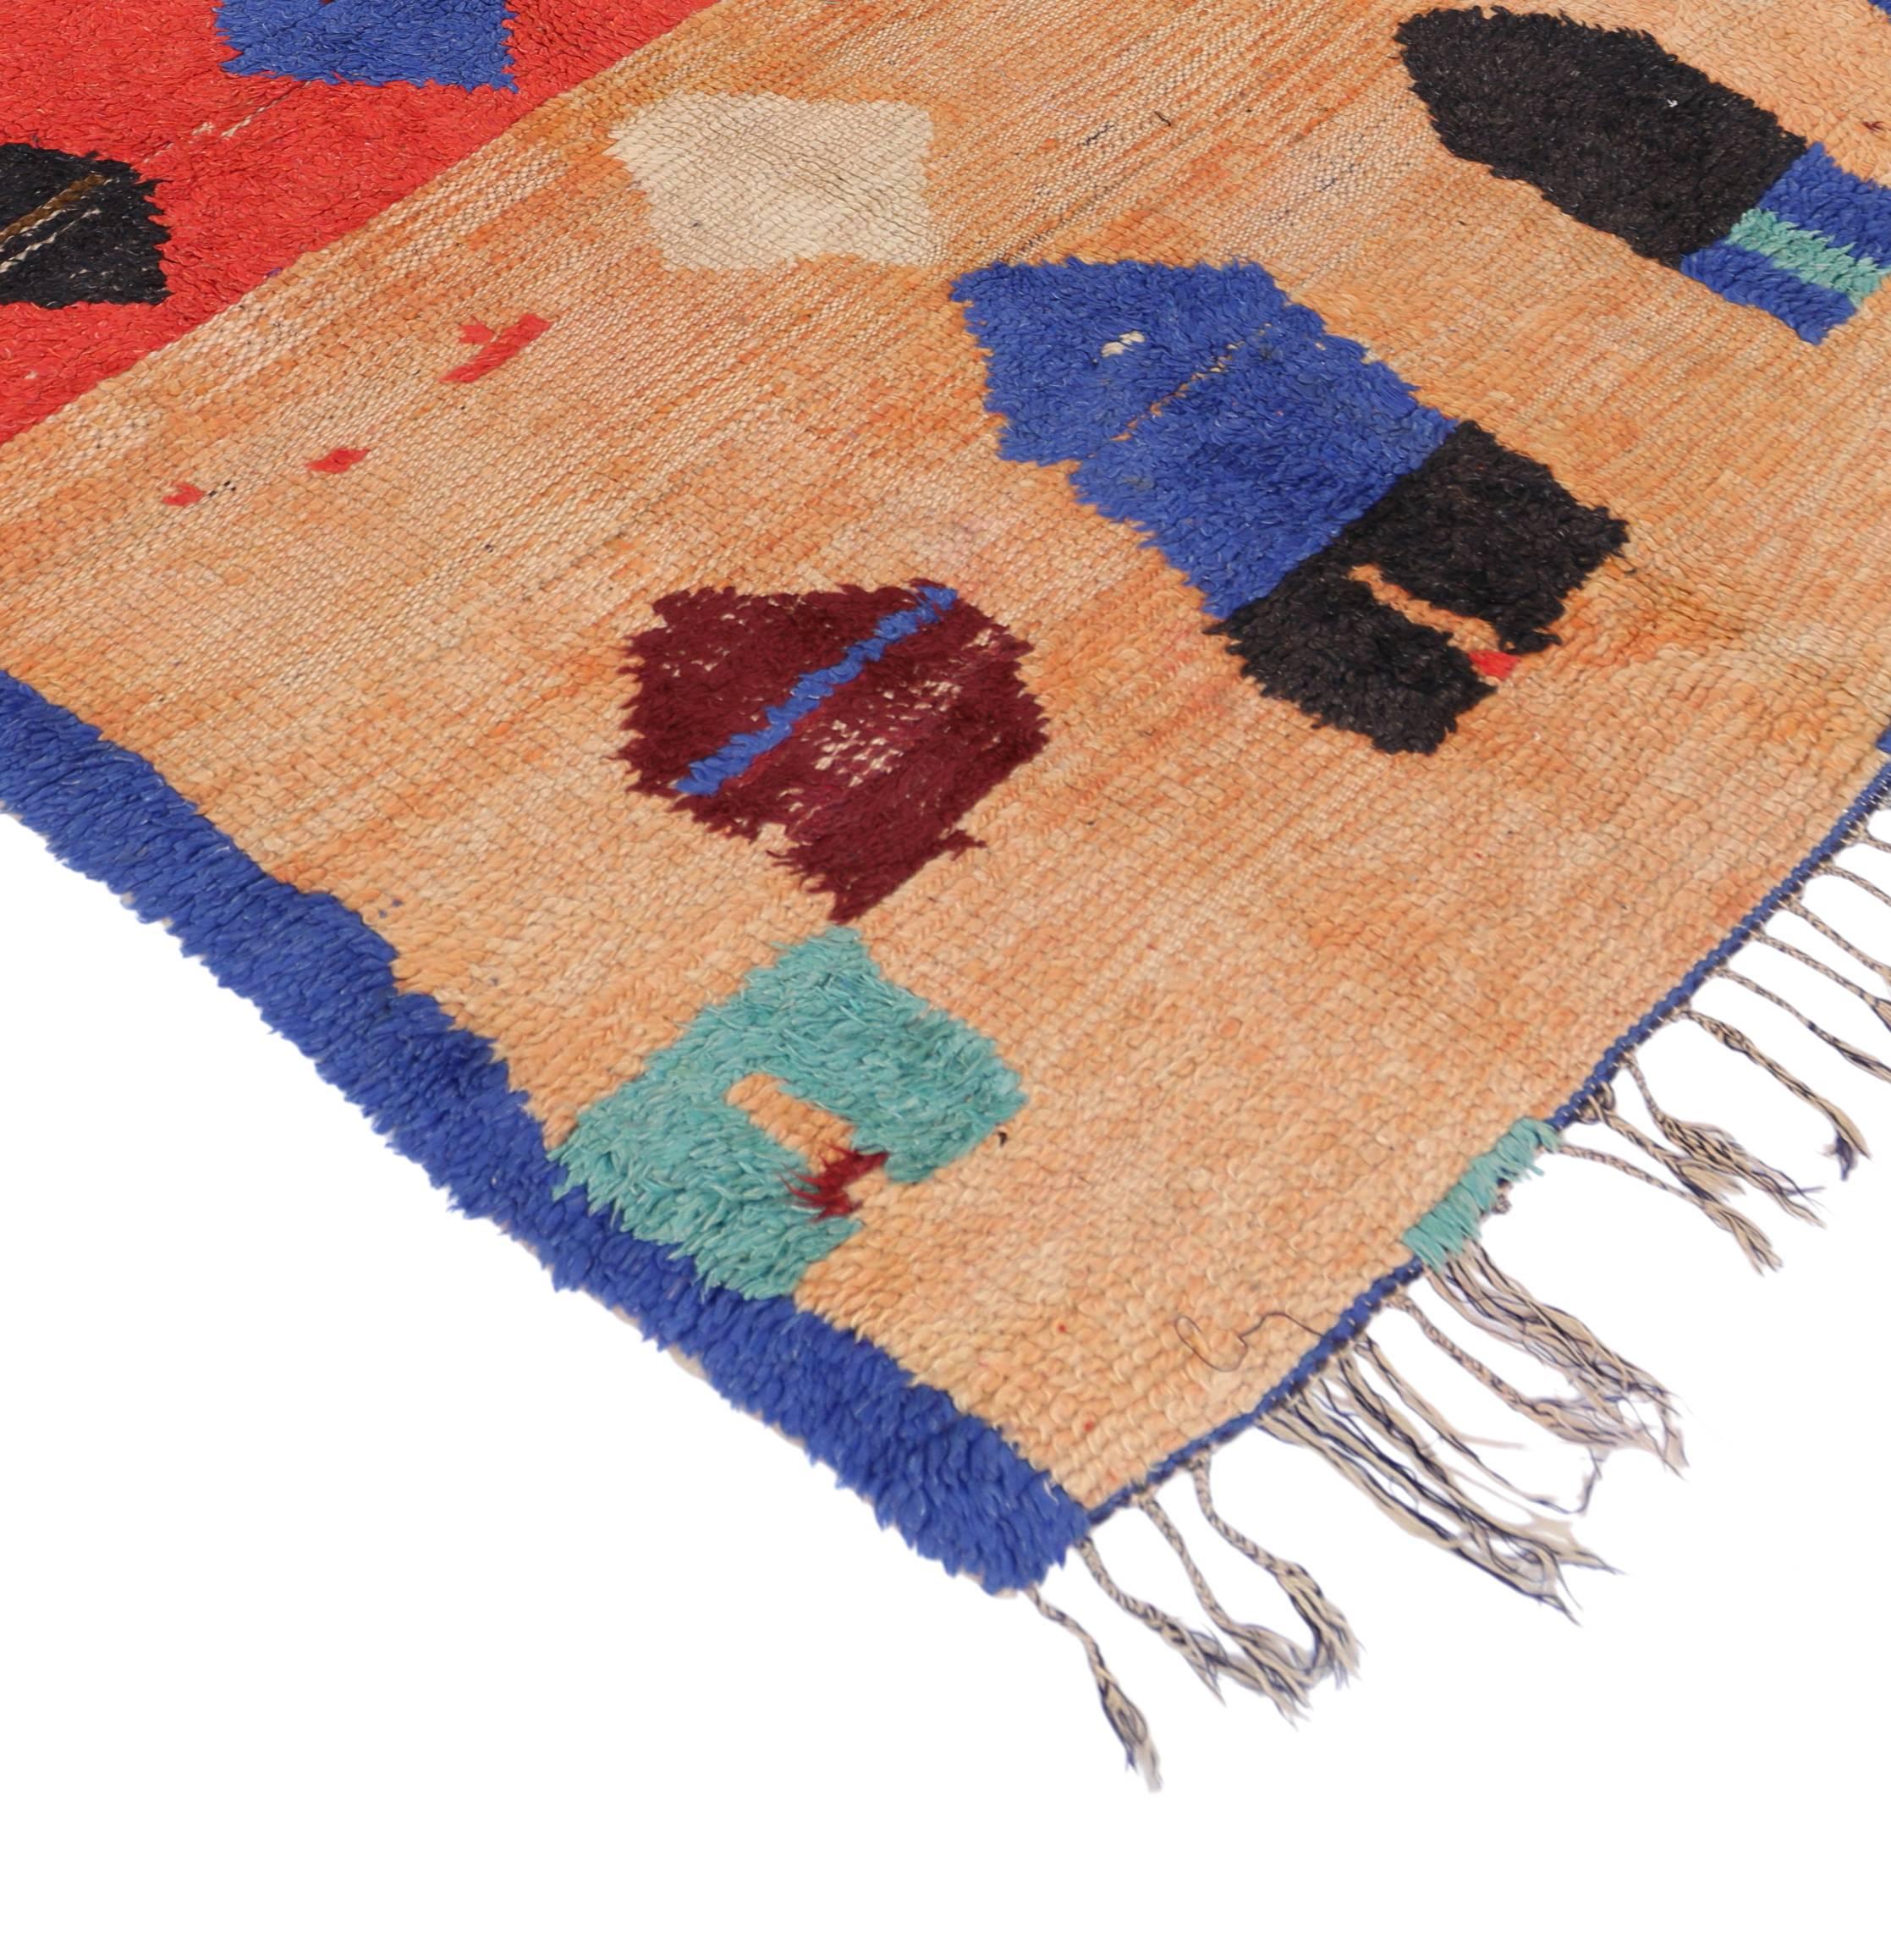 74808, a vintage Berber Moroccan rug with tribal style. This striking example of a Berber Moroccan rug with tribal style features geometric diamond 